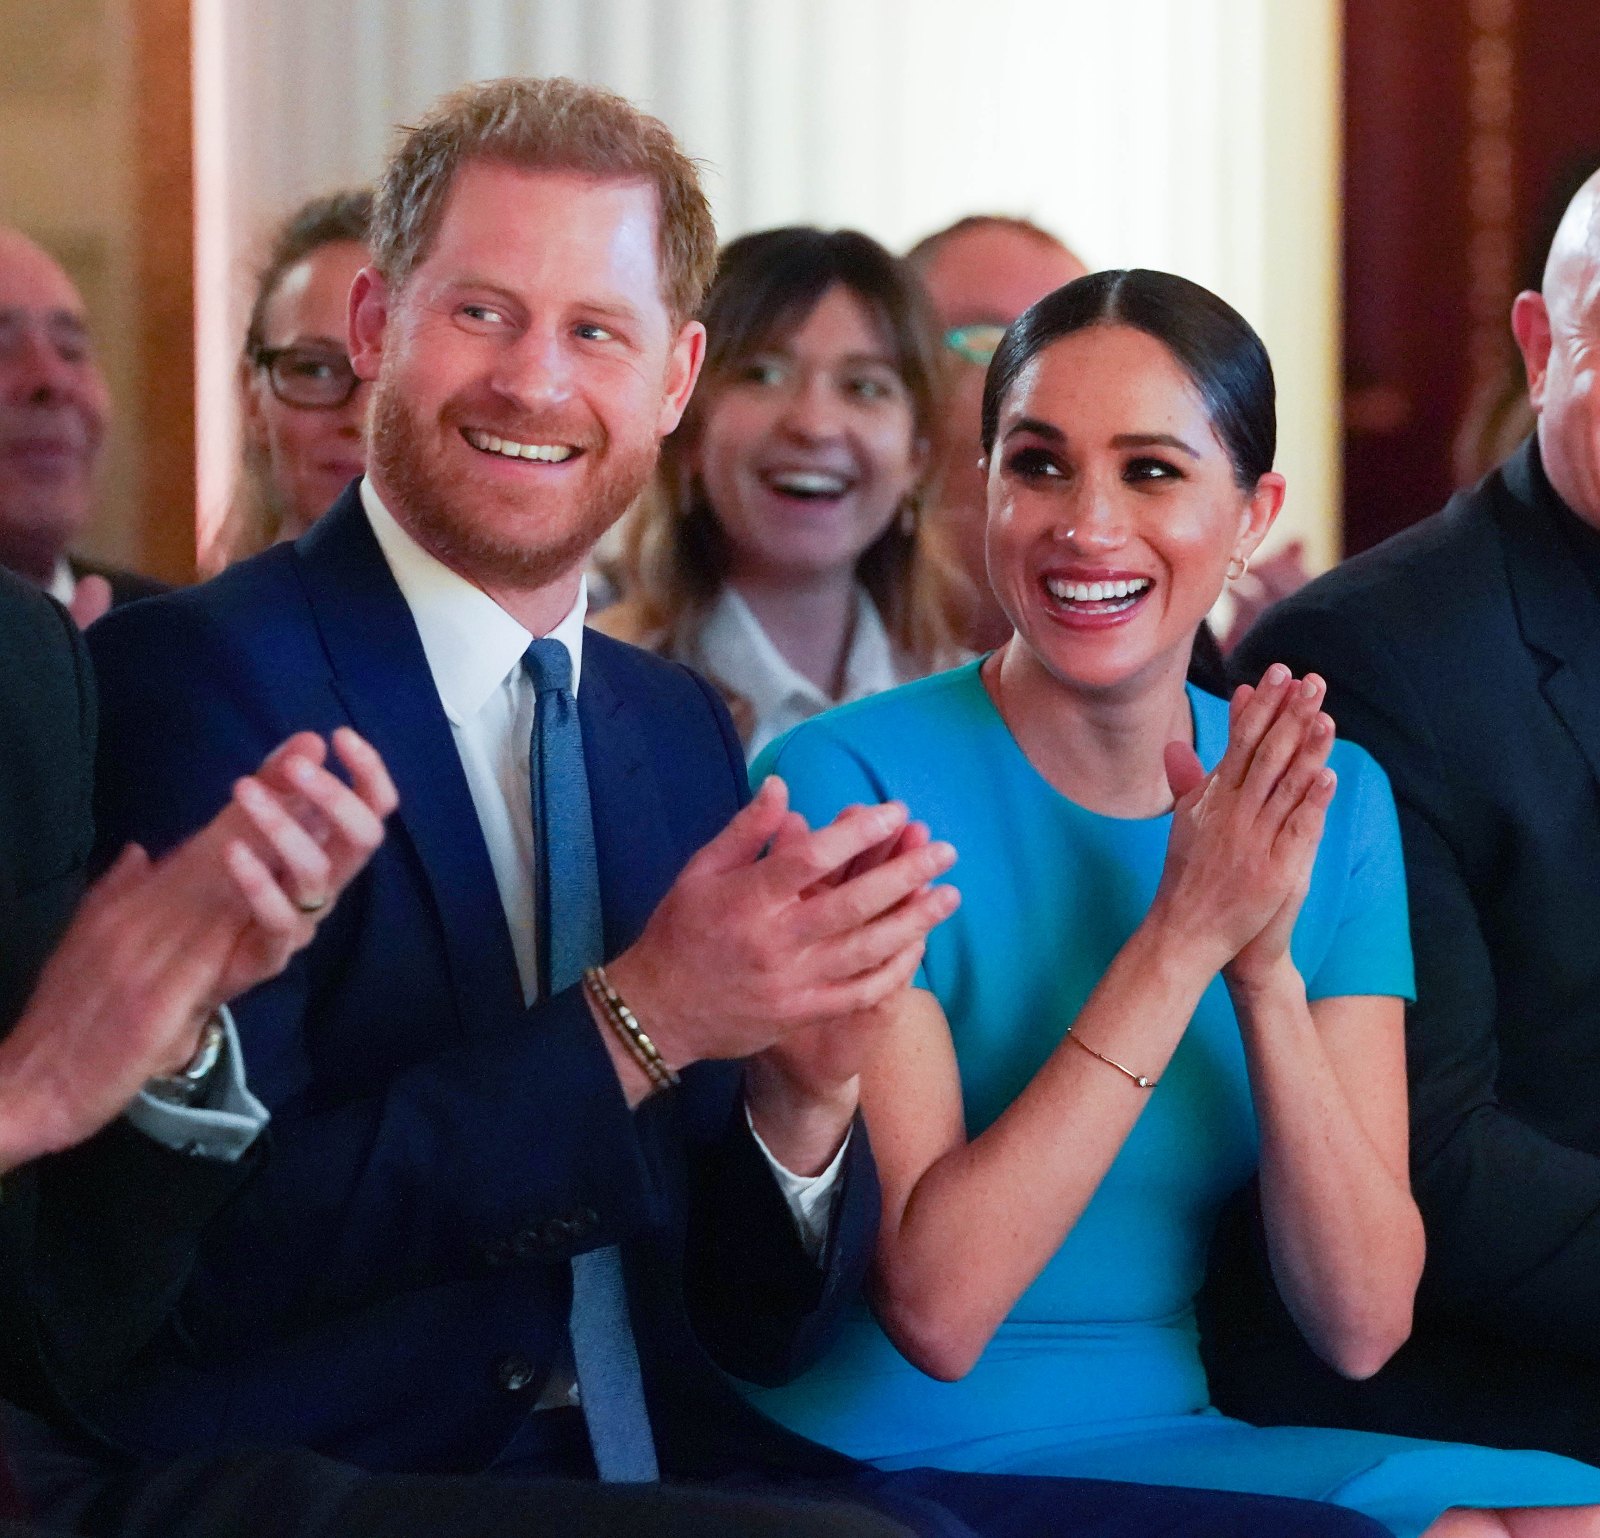 Prince Harry and Meghan Markle have a rainbow baby.